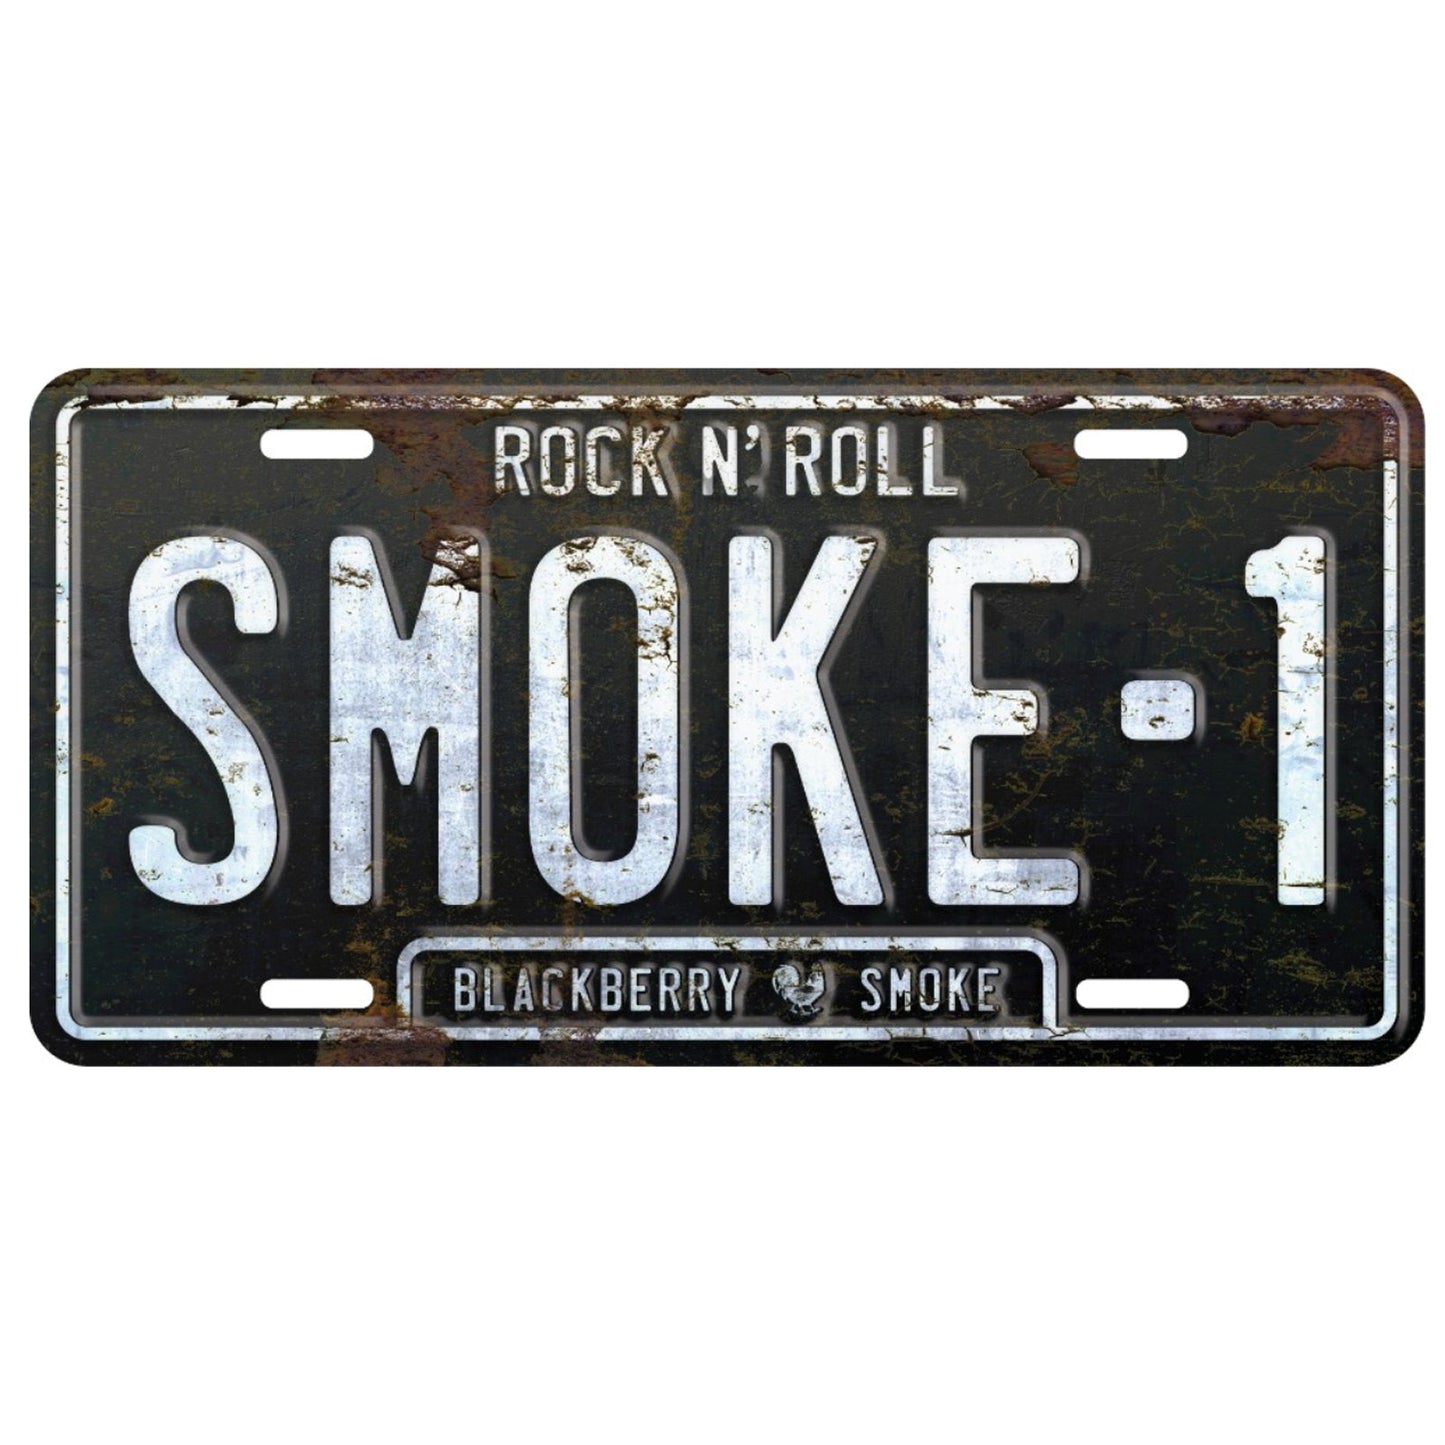 20 Years in Show Business LICENSE PLATE